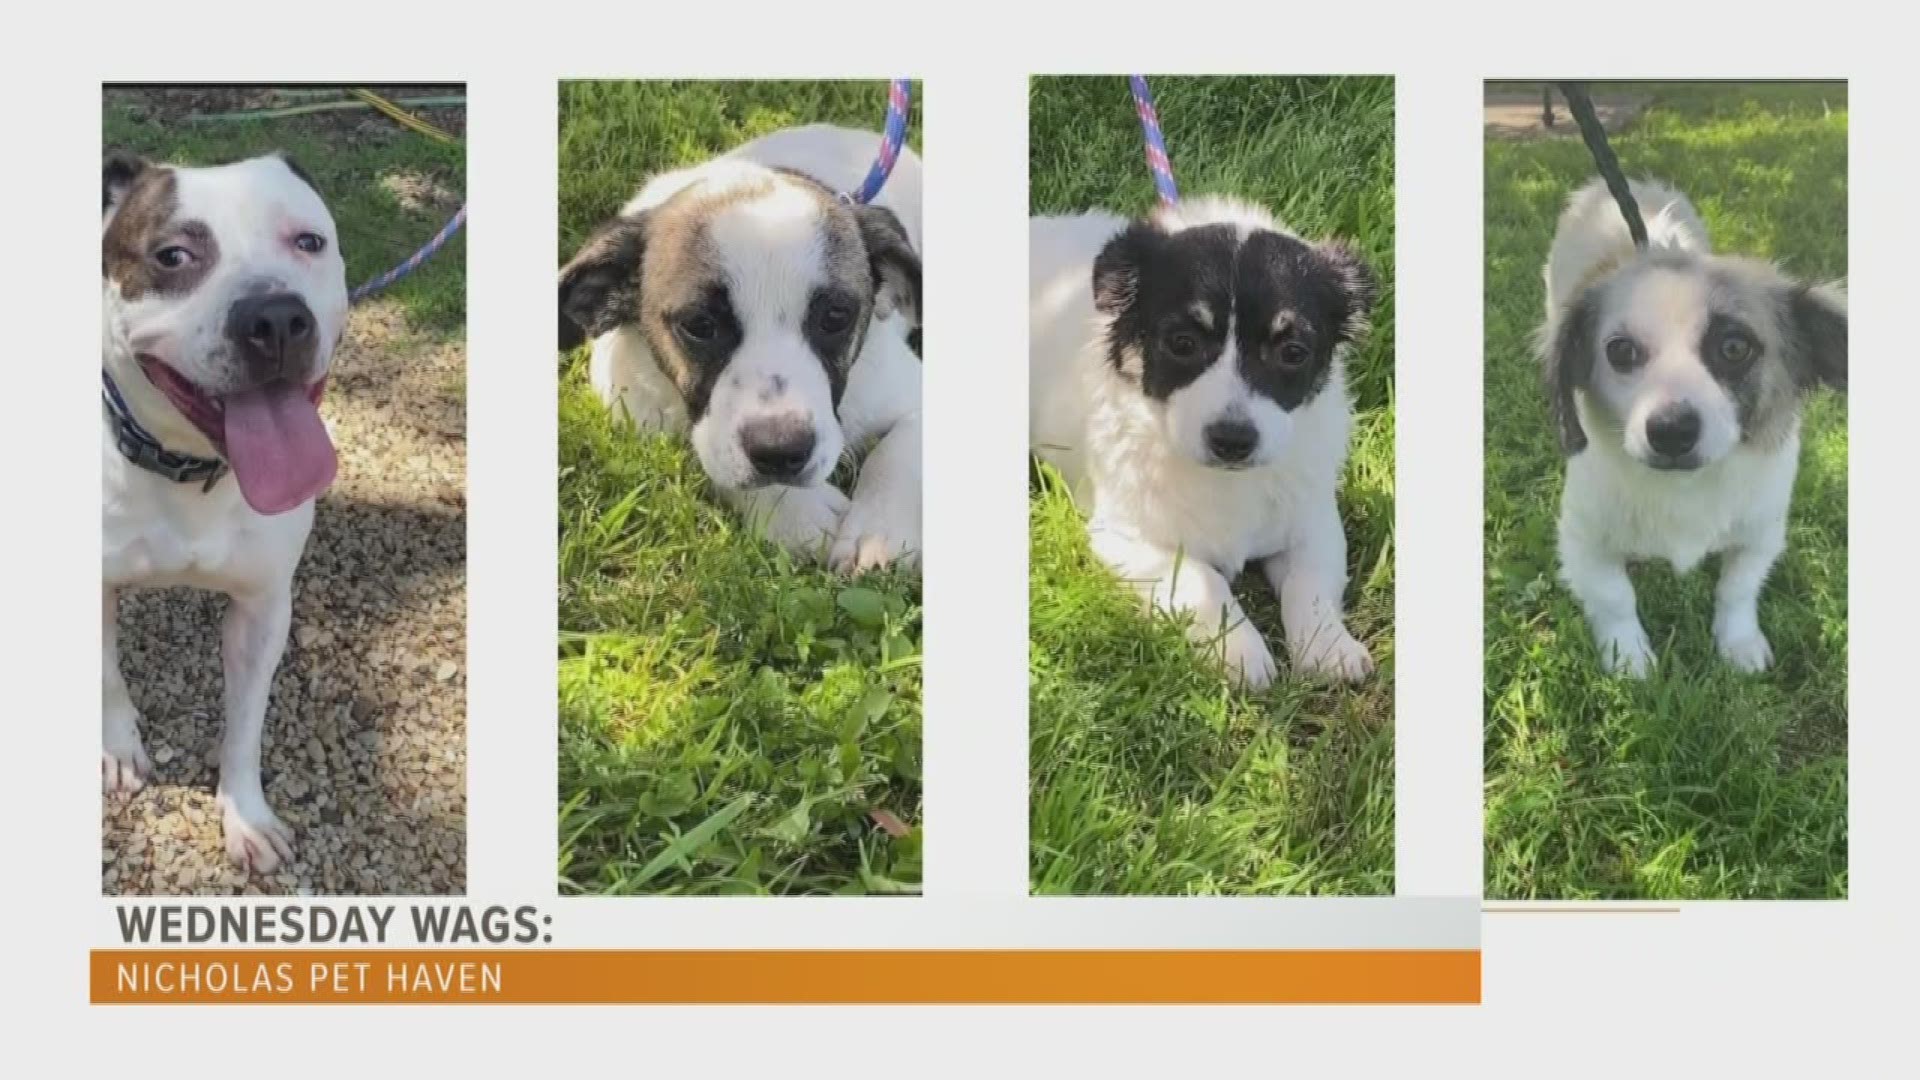 If you'd like to adopt one of these furbabies, contact Nicholas Pet Haven at  (903) 312-7585.